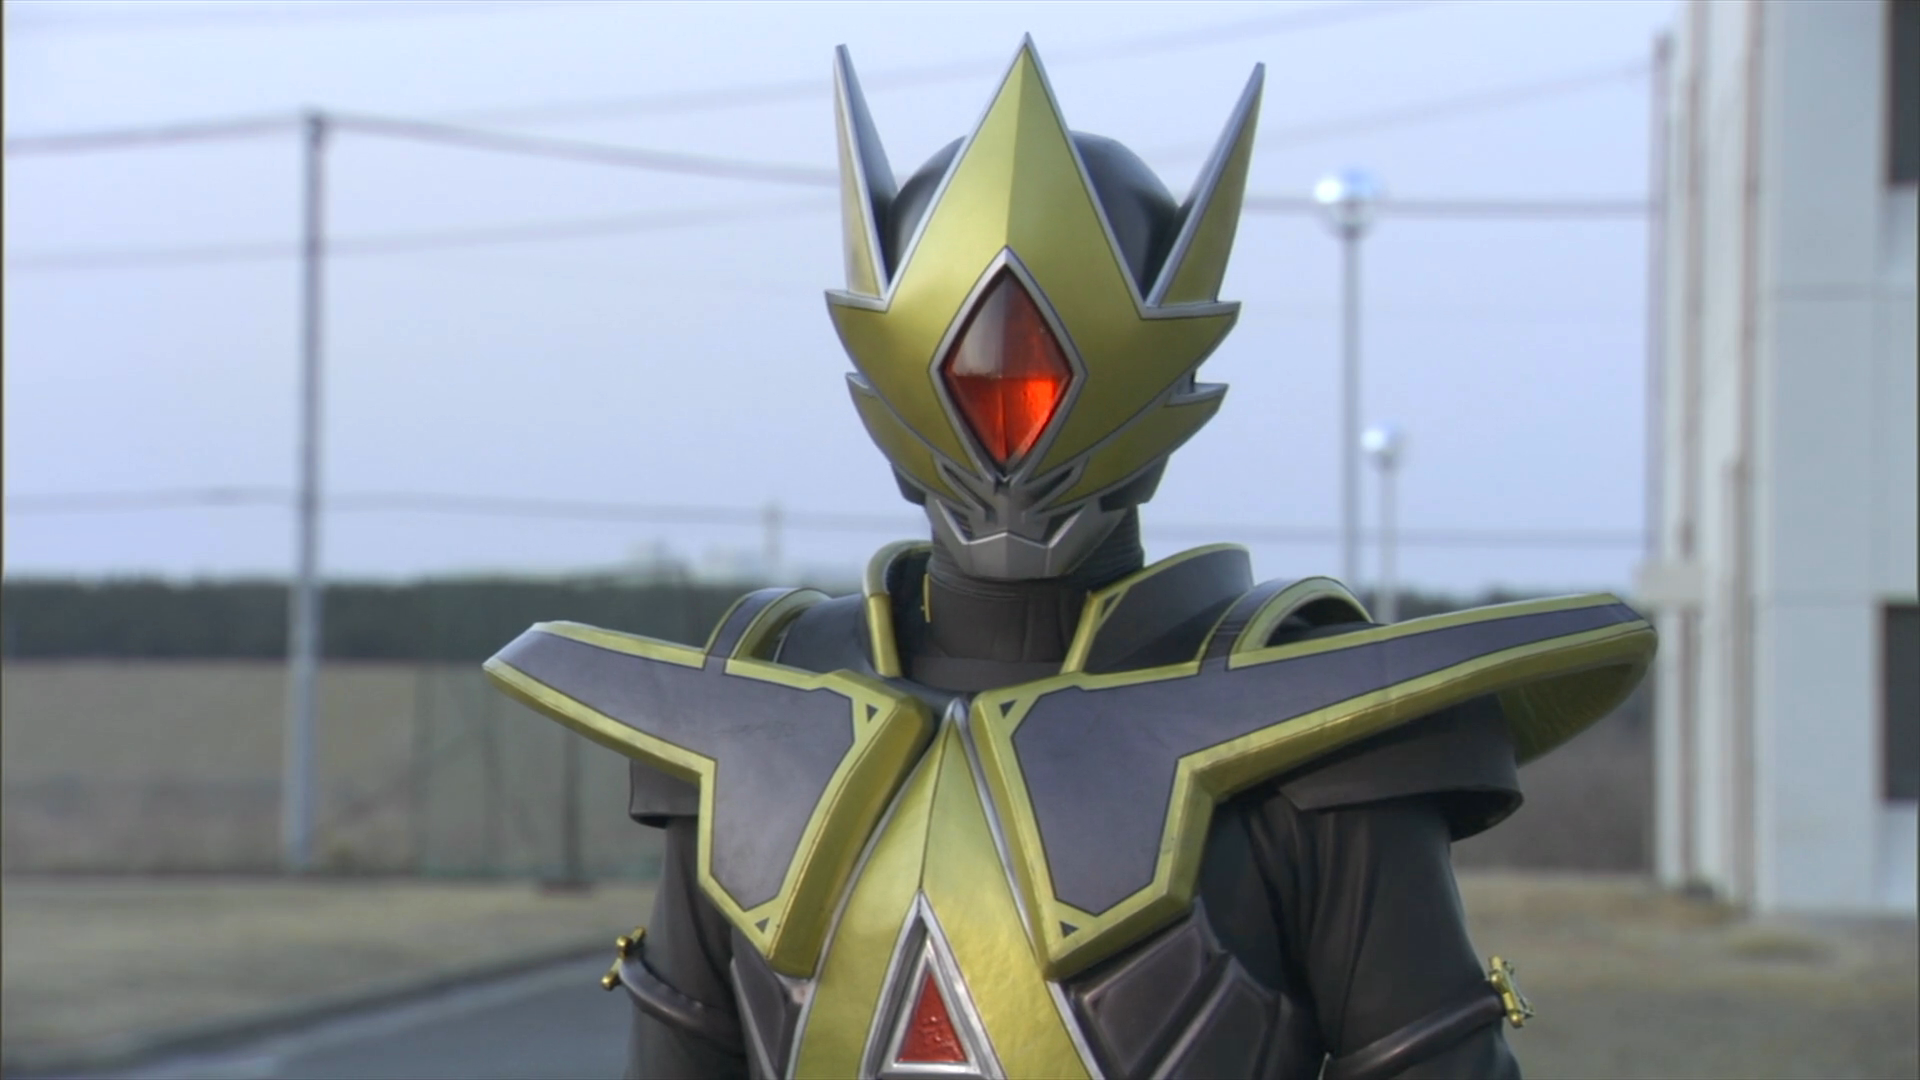 http://vignette1.wikia.nocookie.net/kamenrider/images/b/b6/Glaive_in_Episode_Yellow.png/revision/latest?cb=20140419085940